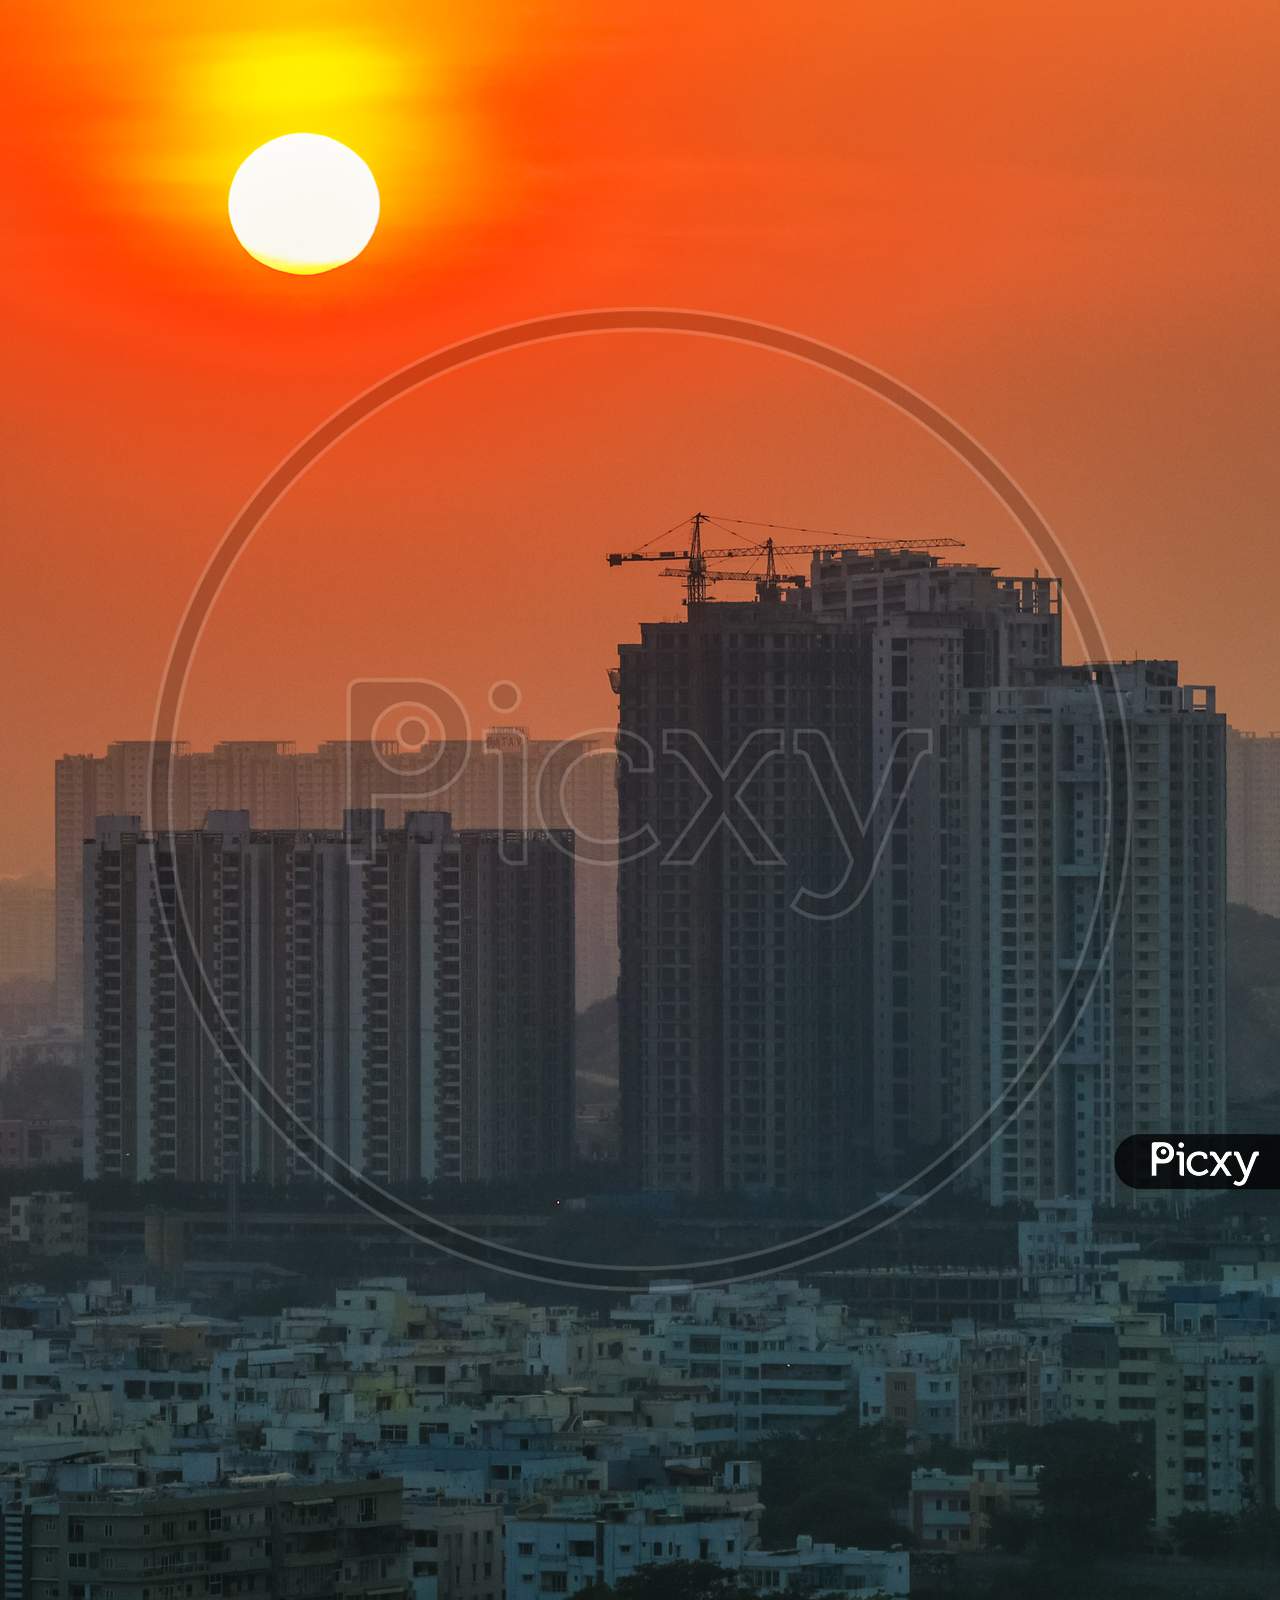 Sunset over Multirise Buildings in Hyderabad